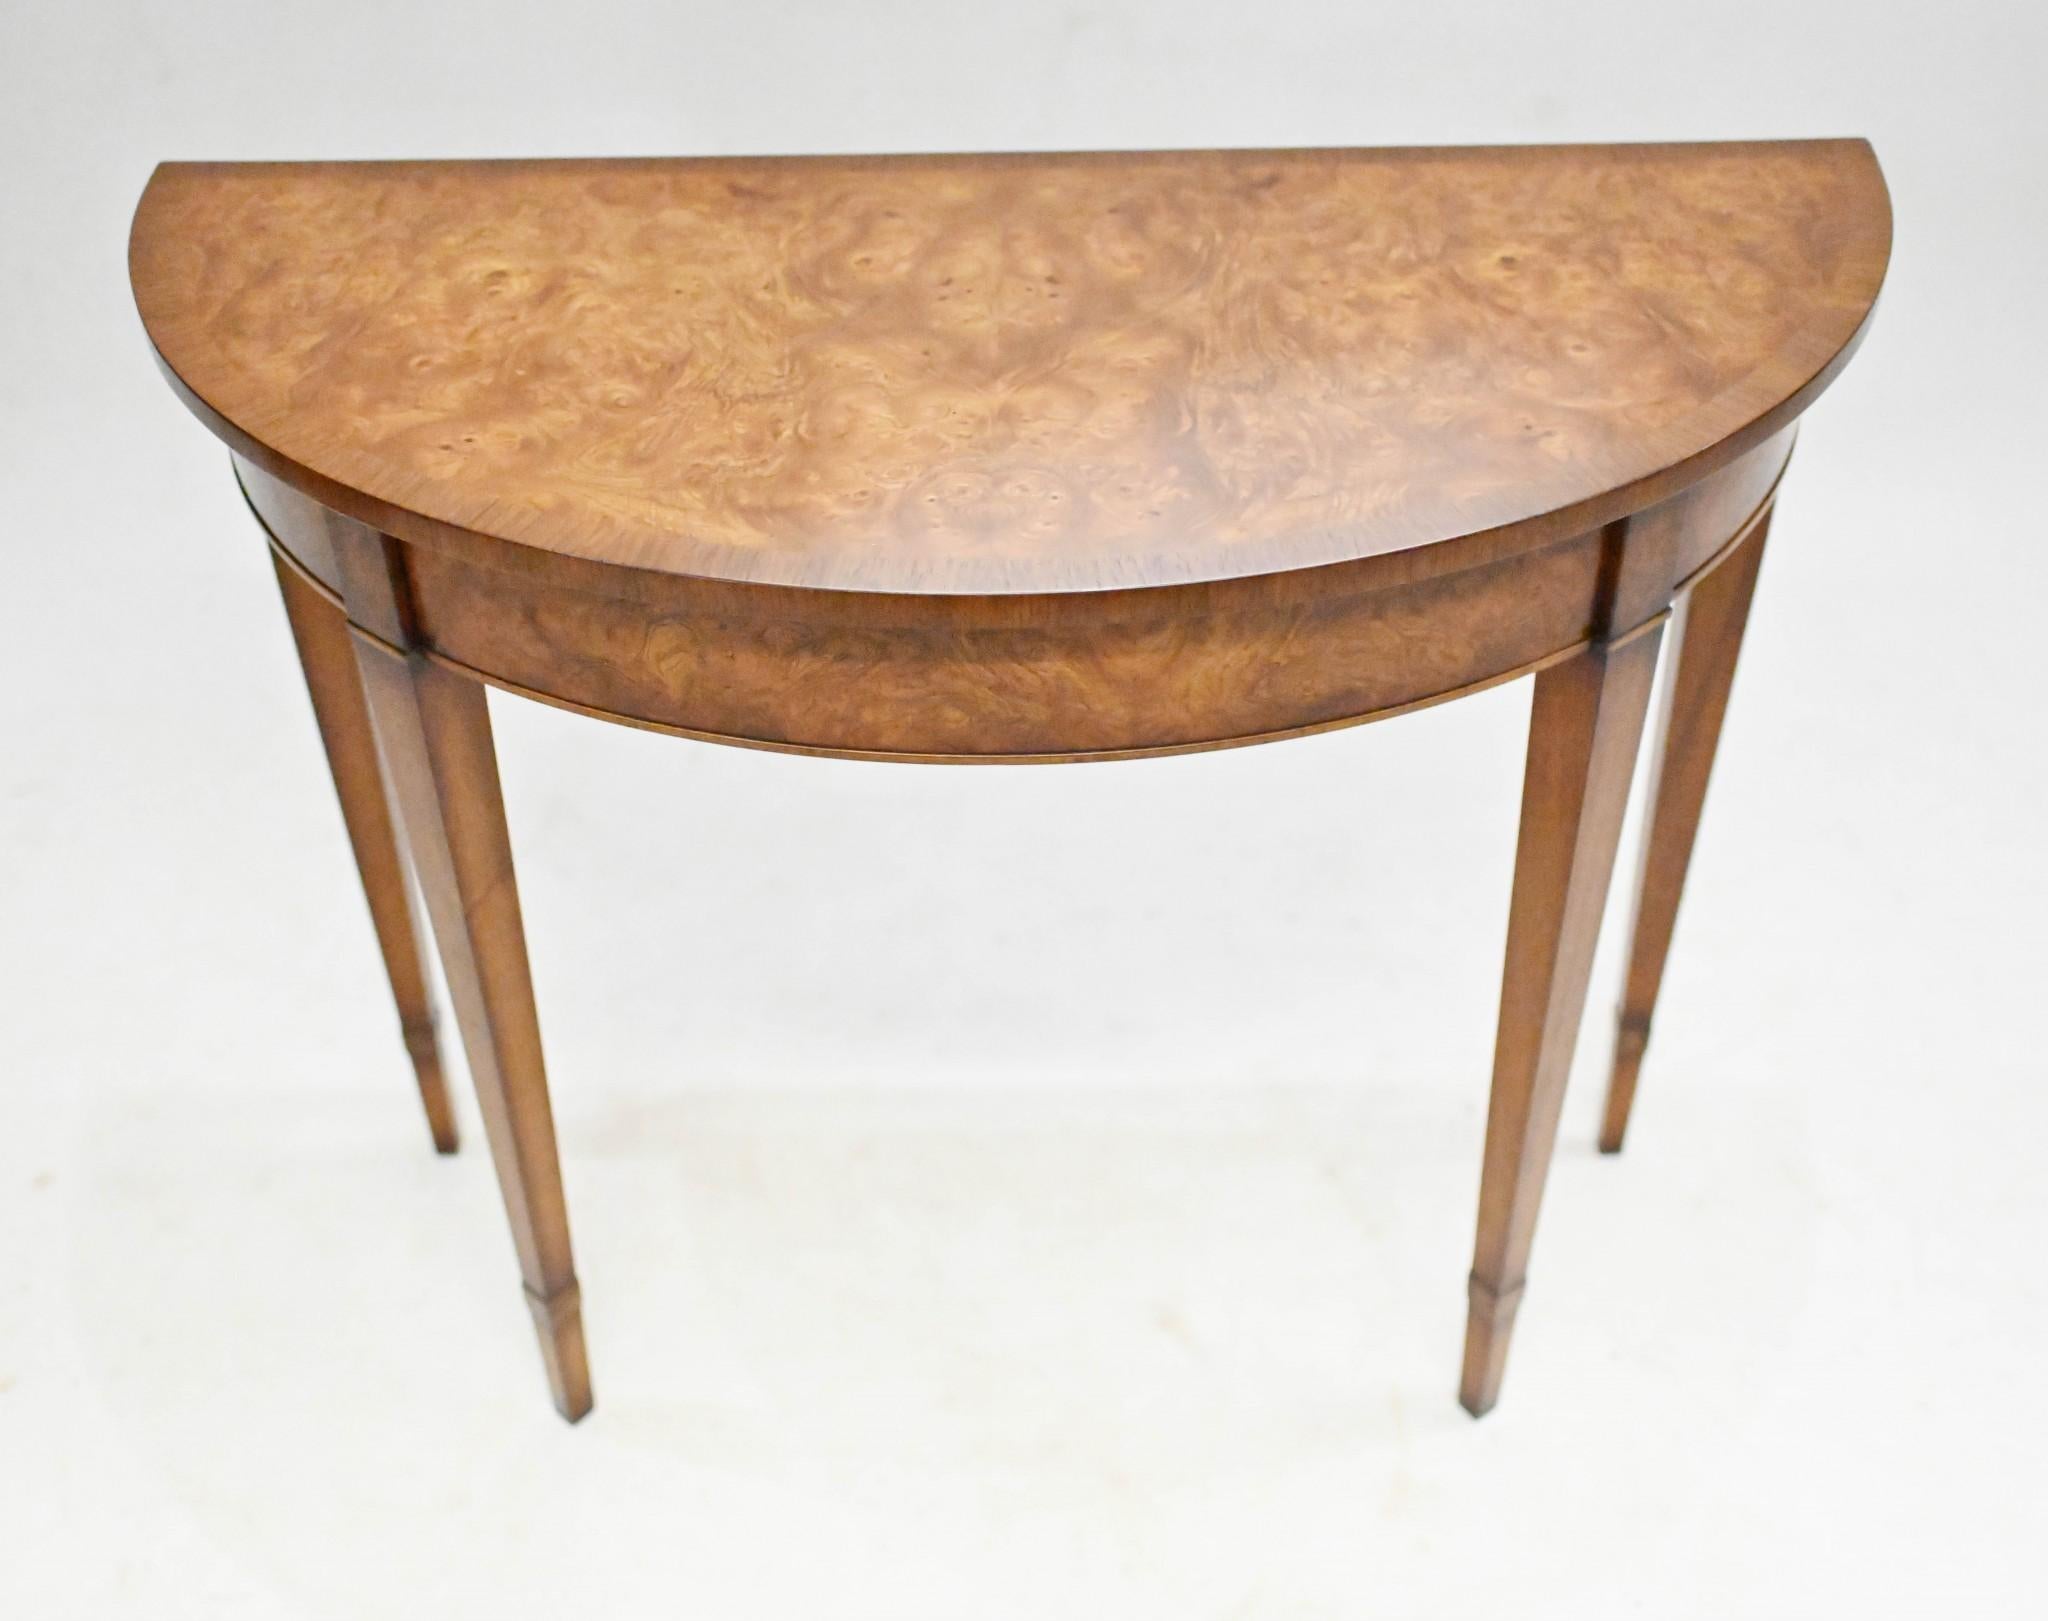 Pair opulent walnut console tables in the Adams manner
Demi lune - half moon - form 
Classically refined with clean design and tapered legs
Great finish to the walnut
Offered in great condition ready for home use right away
Will ship to anywhere in